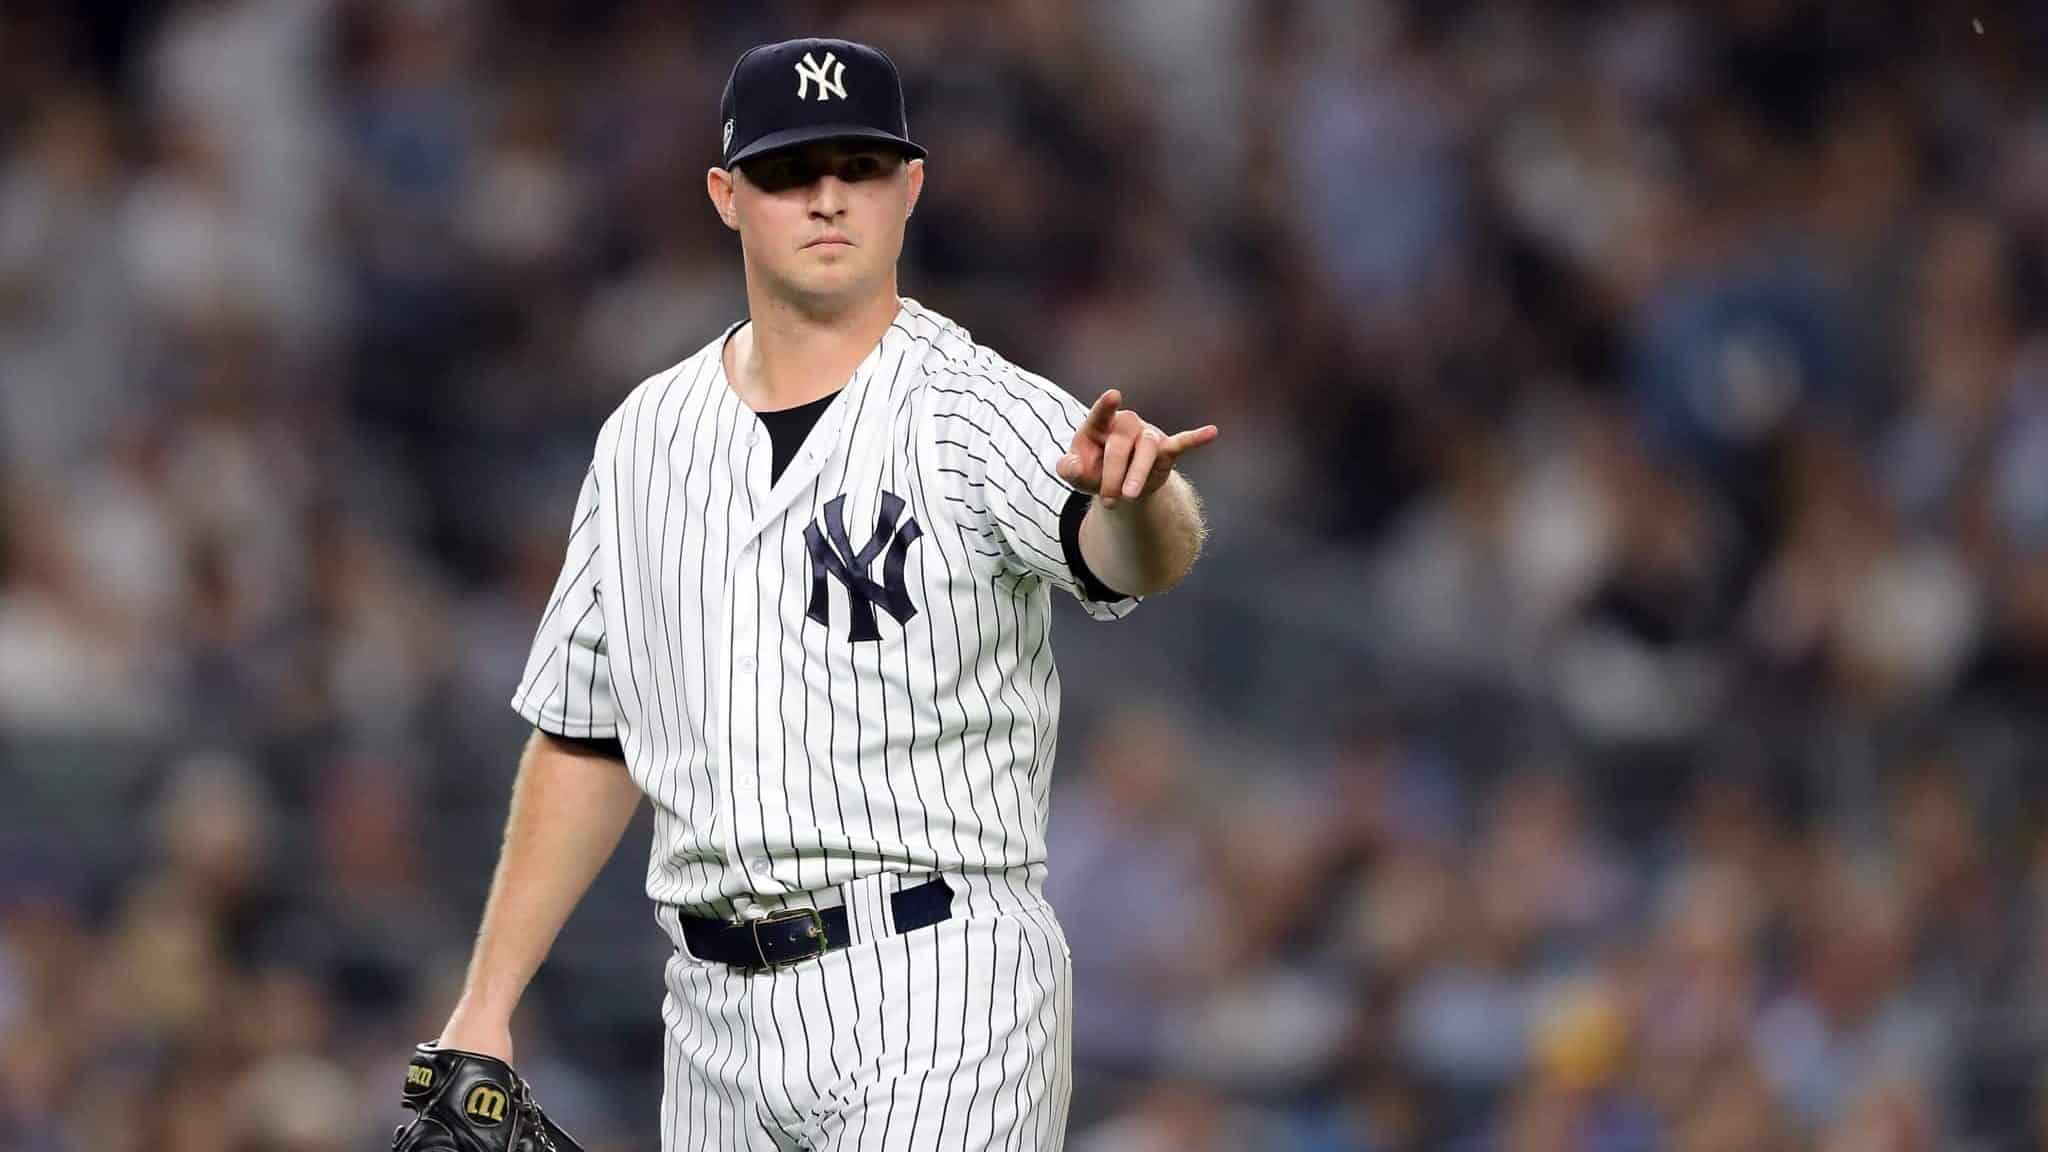 NEW YORK, NEW YORK - OCTOBER 09: Zach Britton #53 of the New York Yankees reacts in the fourth inning against the Boston Red Sox during Game Four American League Division Series at Yankee Stadium on October 09, 2018 in the Bronx borough of New York City.